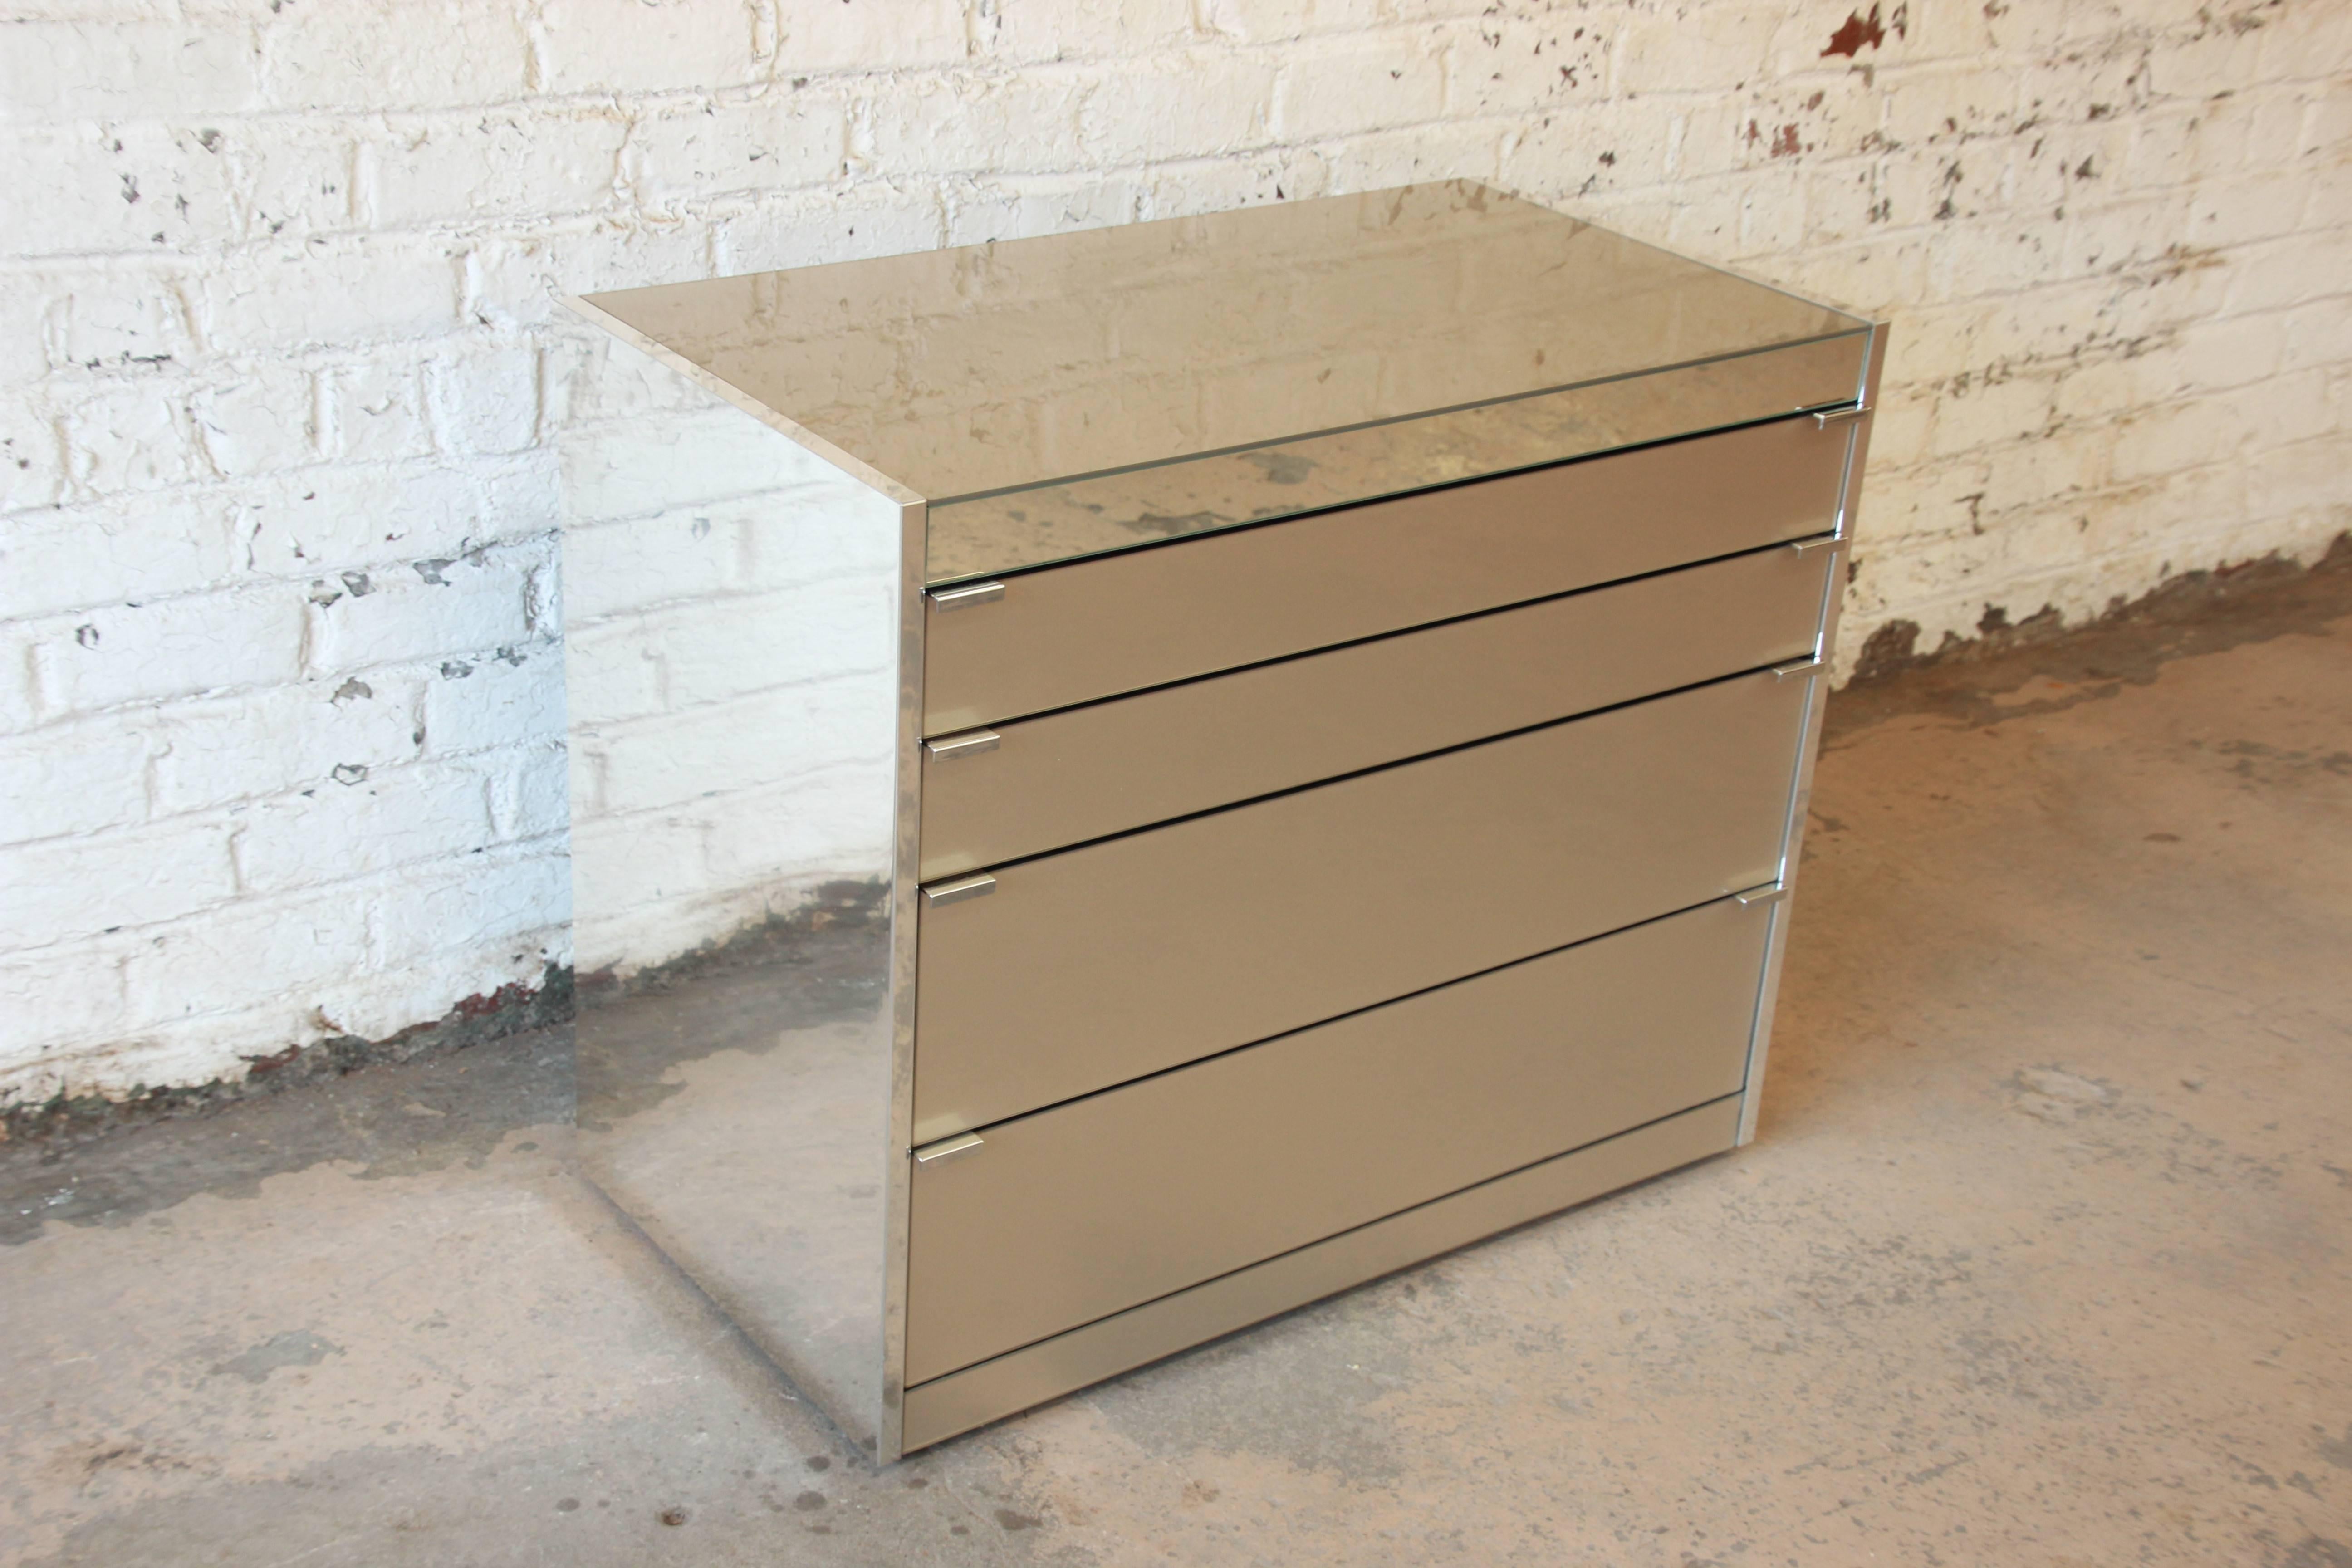 Mid-Century mirrored chest of drawers designed by Guy Barker for Ello. The chest features sleek, Minimalist Mid-Century design and excellent construction from chrome and mirrored glass. It offers good storage, with four graduated drawers. All of the